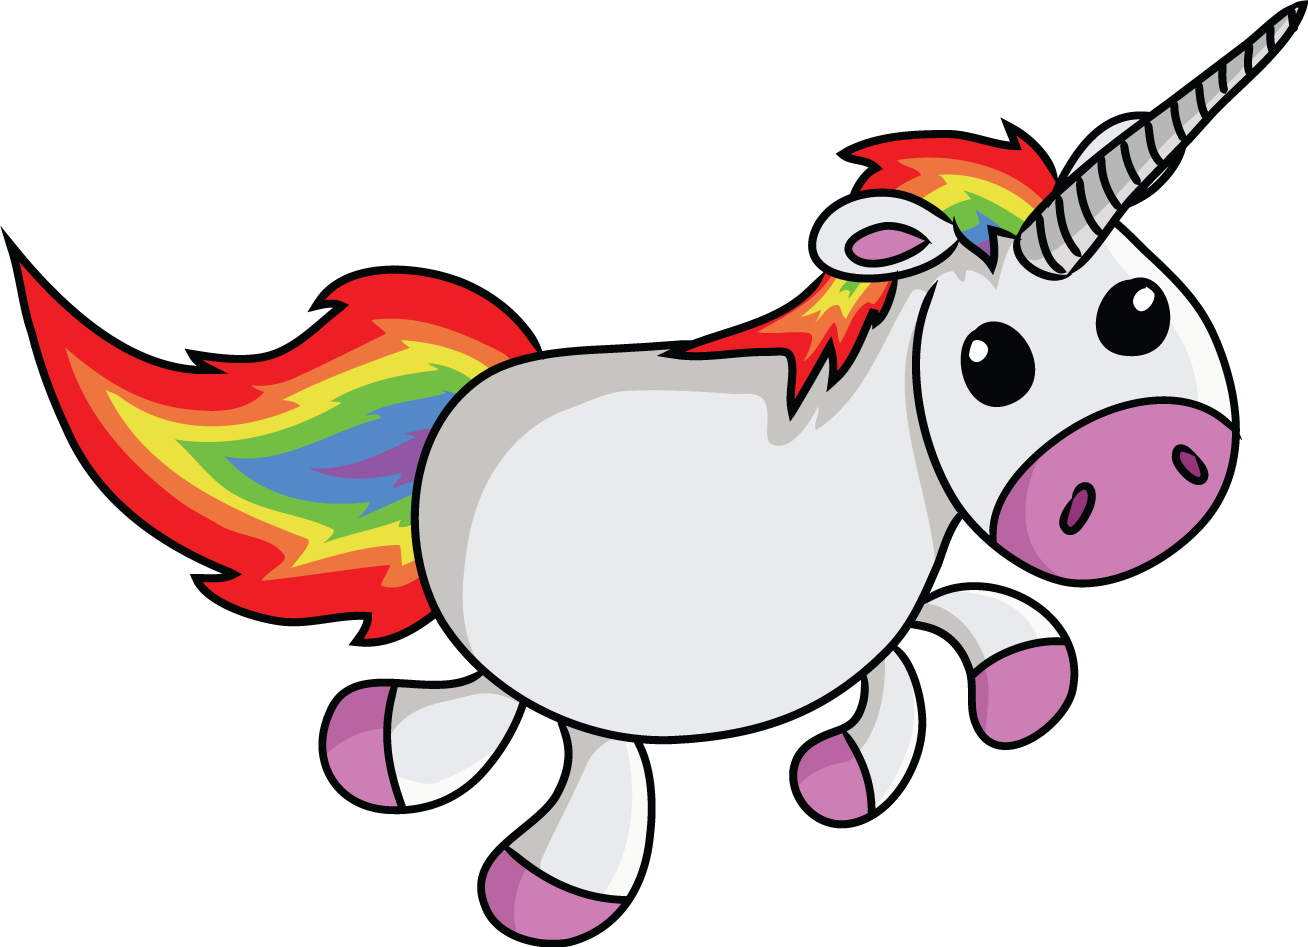 Unicorn With Wings Clipart Black And White Panda. Snowjet.co 